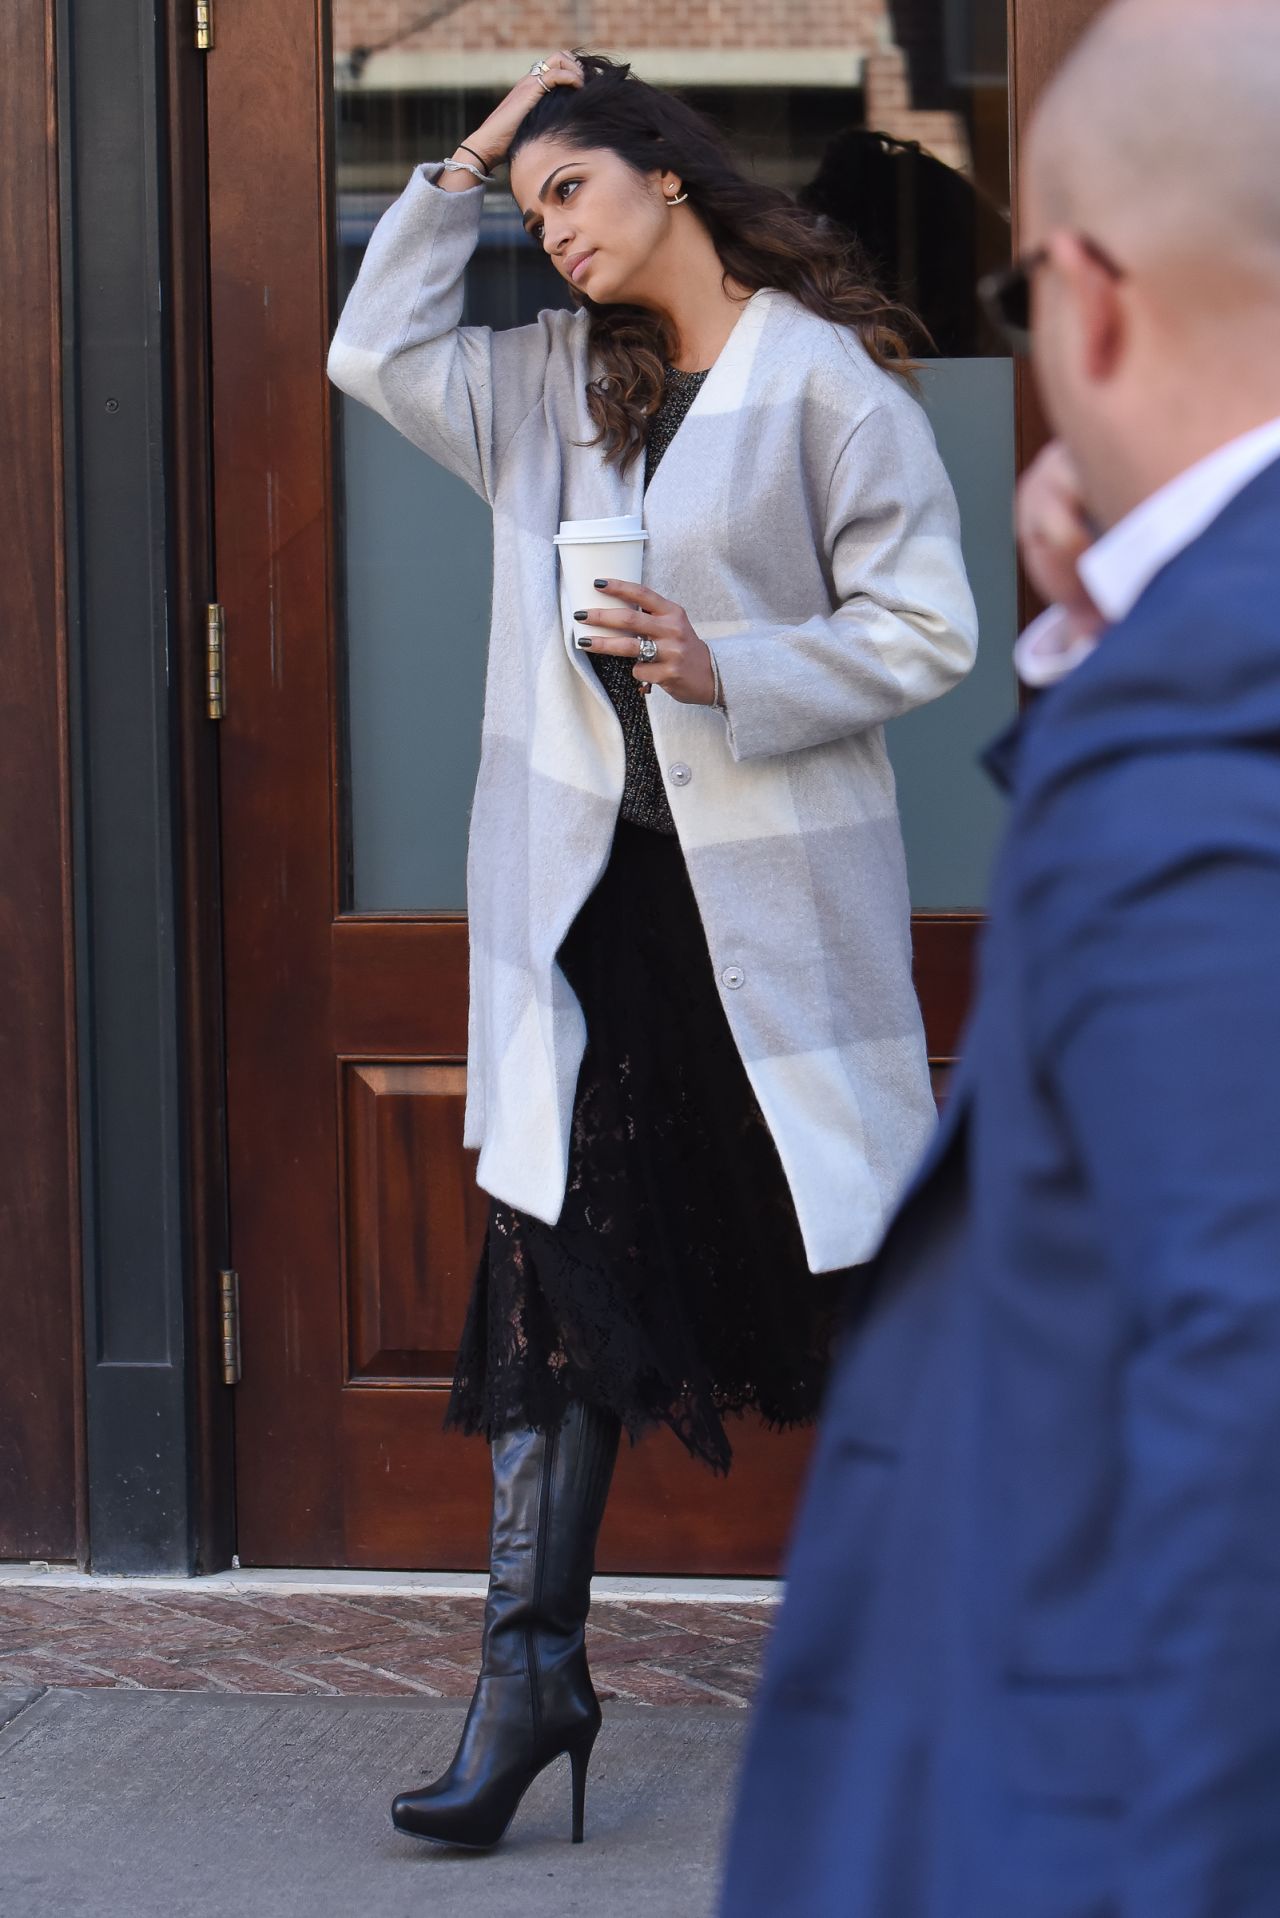 camila-alves-leaves-her-downtown-hotel-m